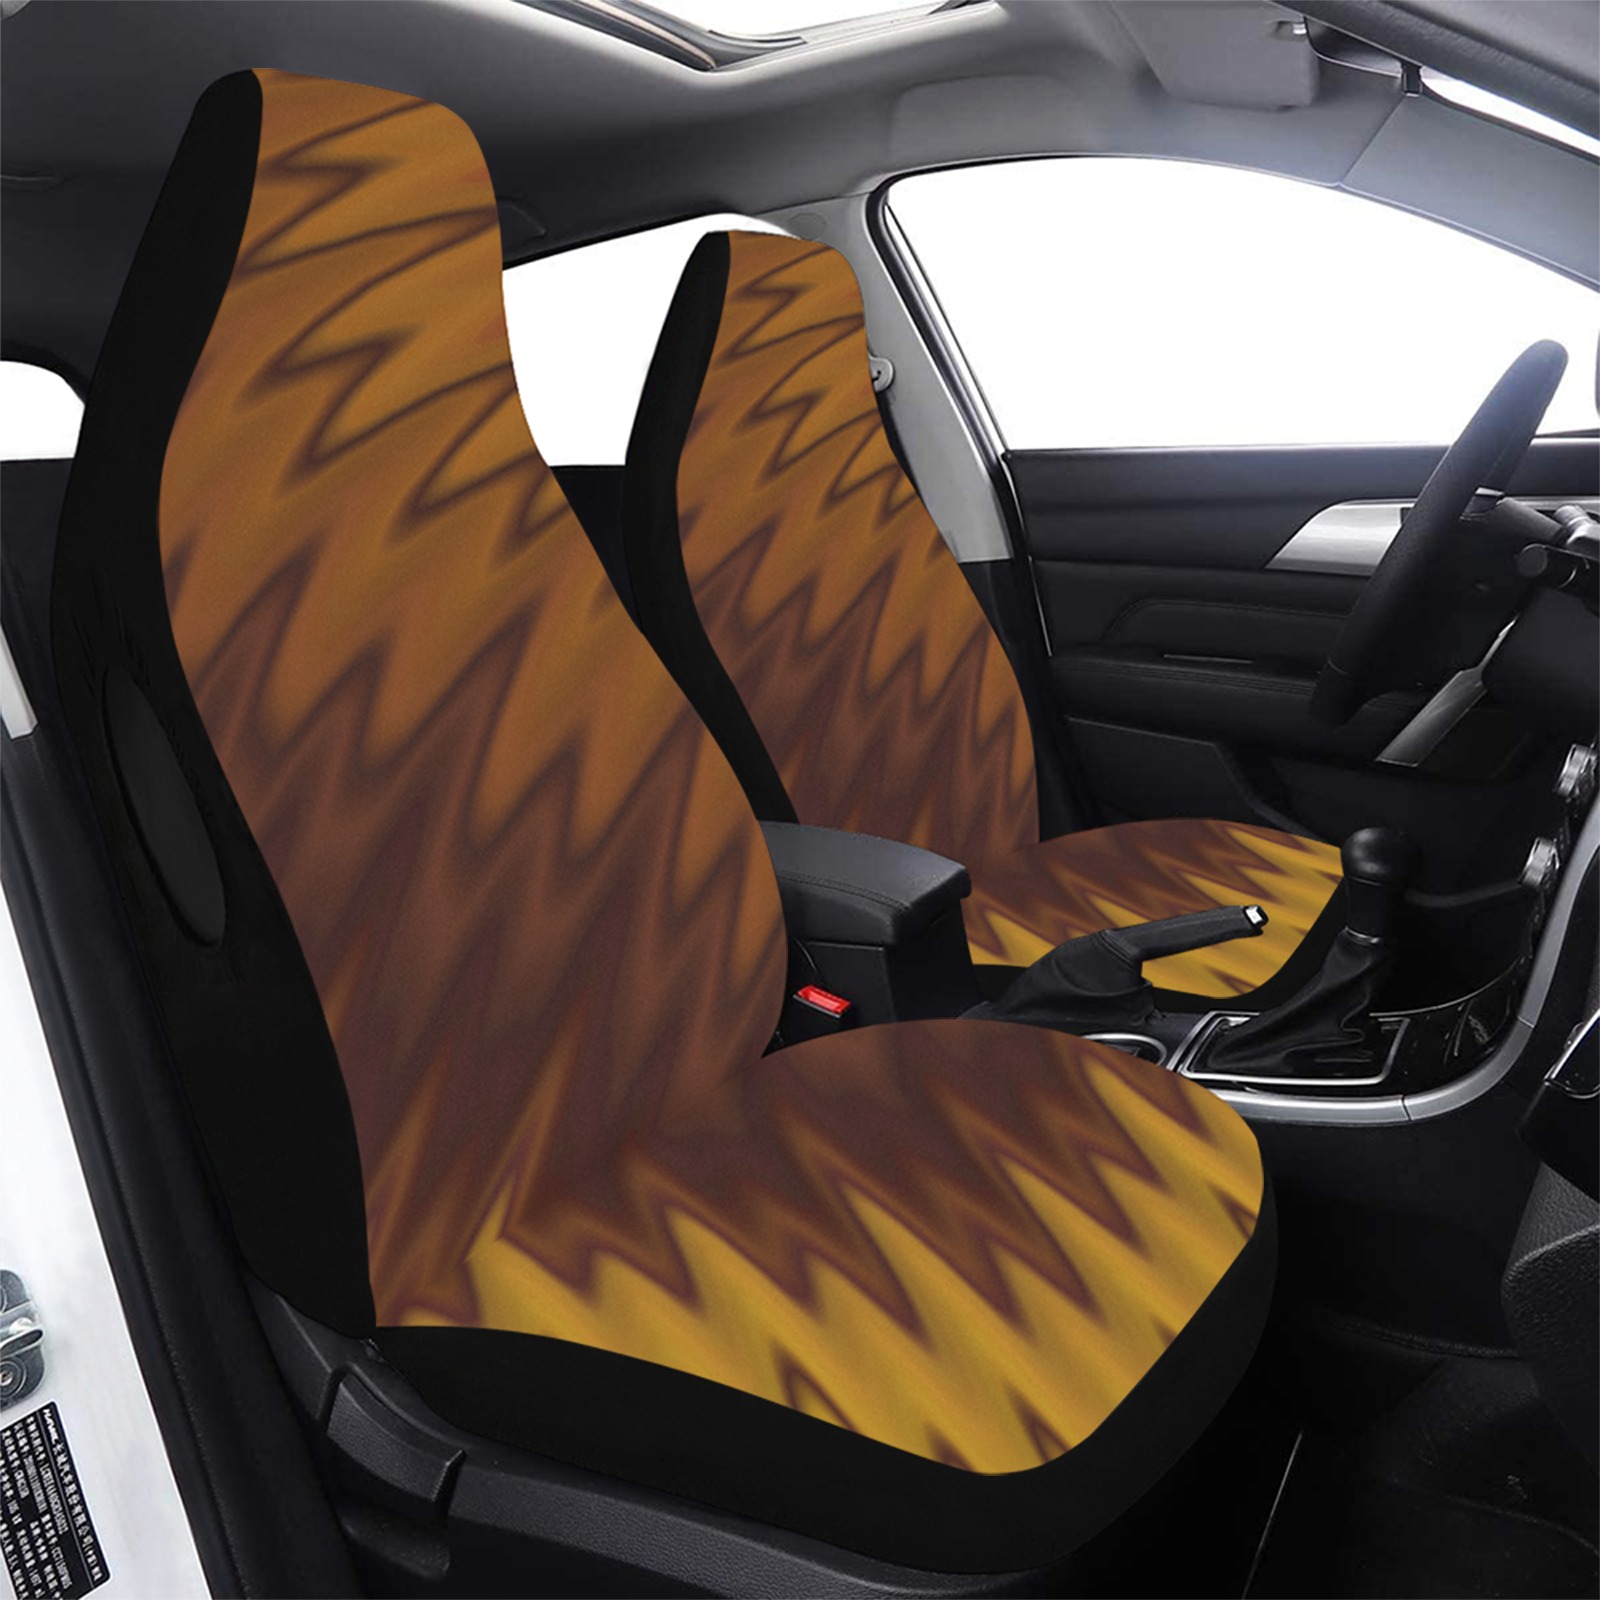 Yellow/Brown Diagonal Abstract Car Seat Cover Airbag Compatible (Set of 2)